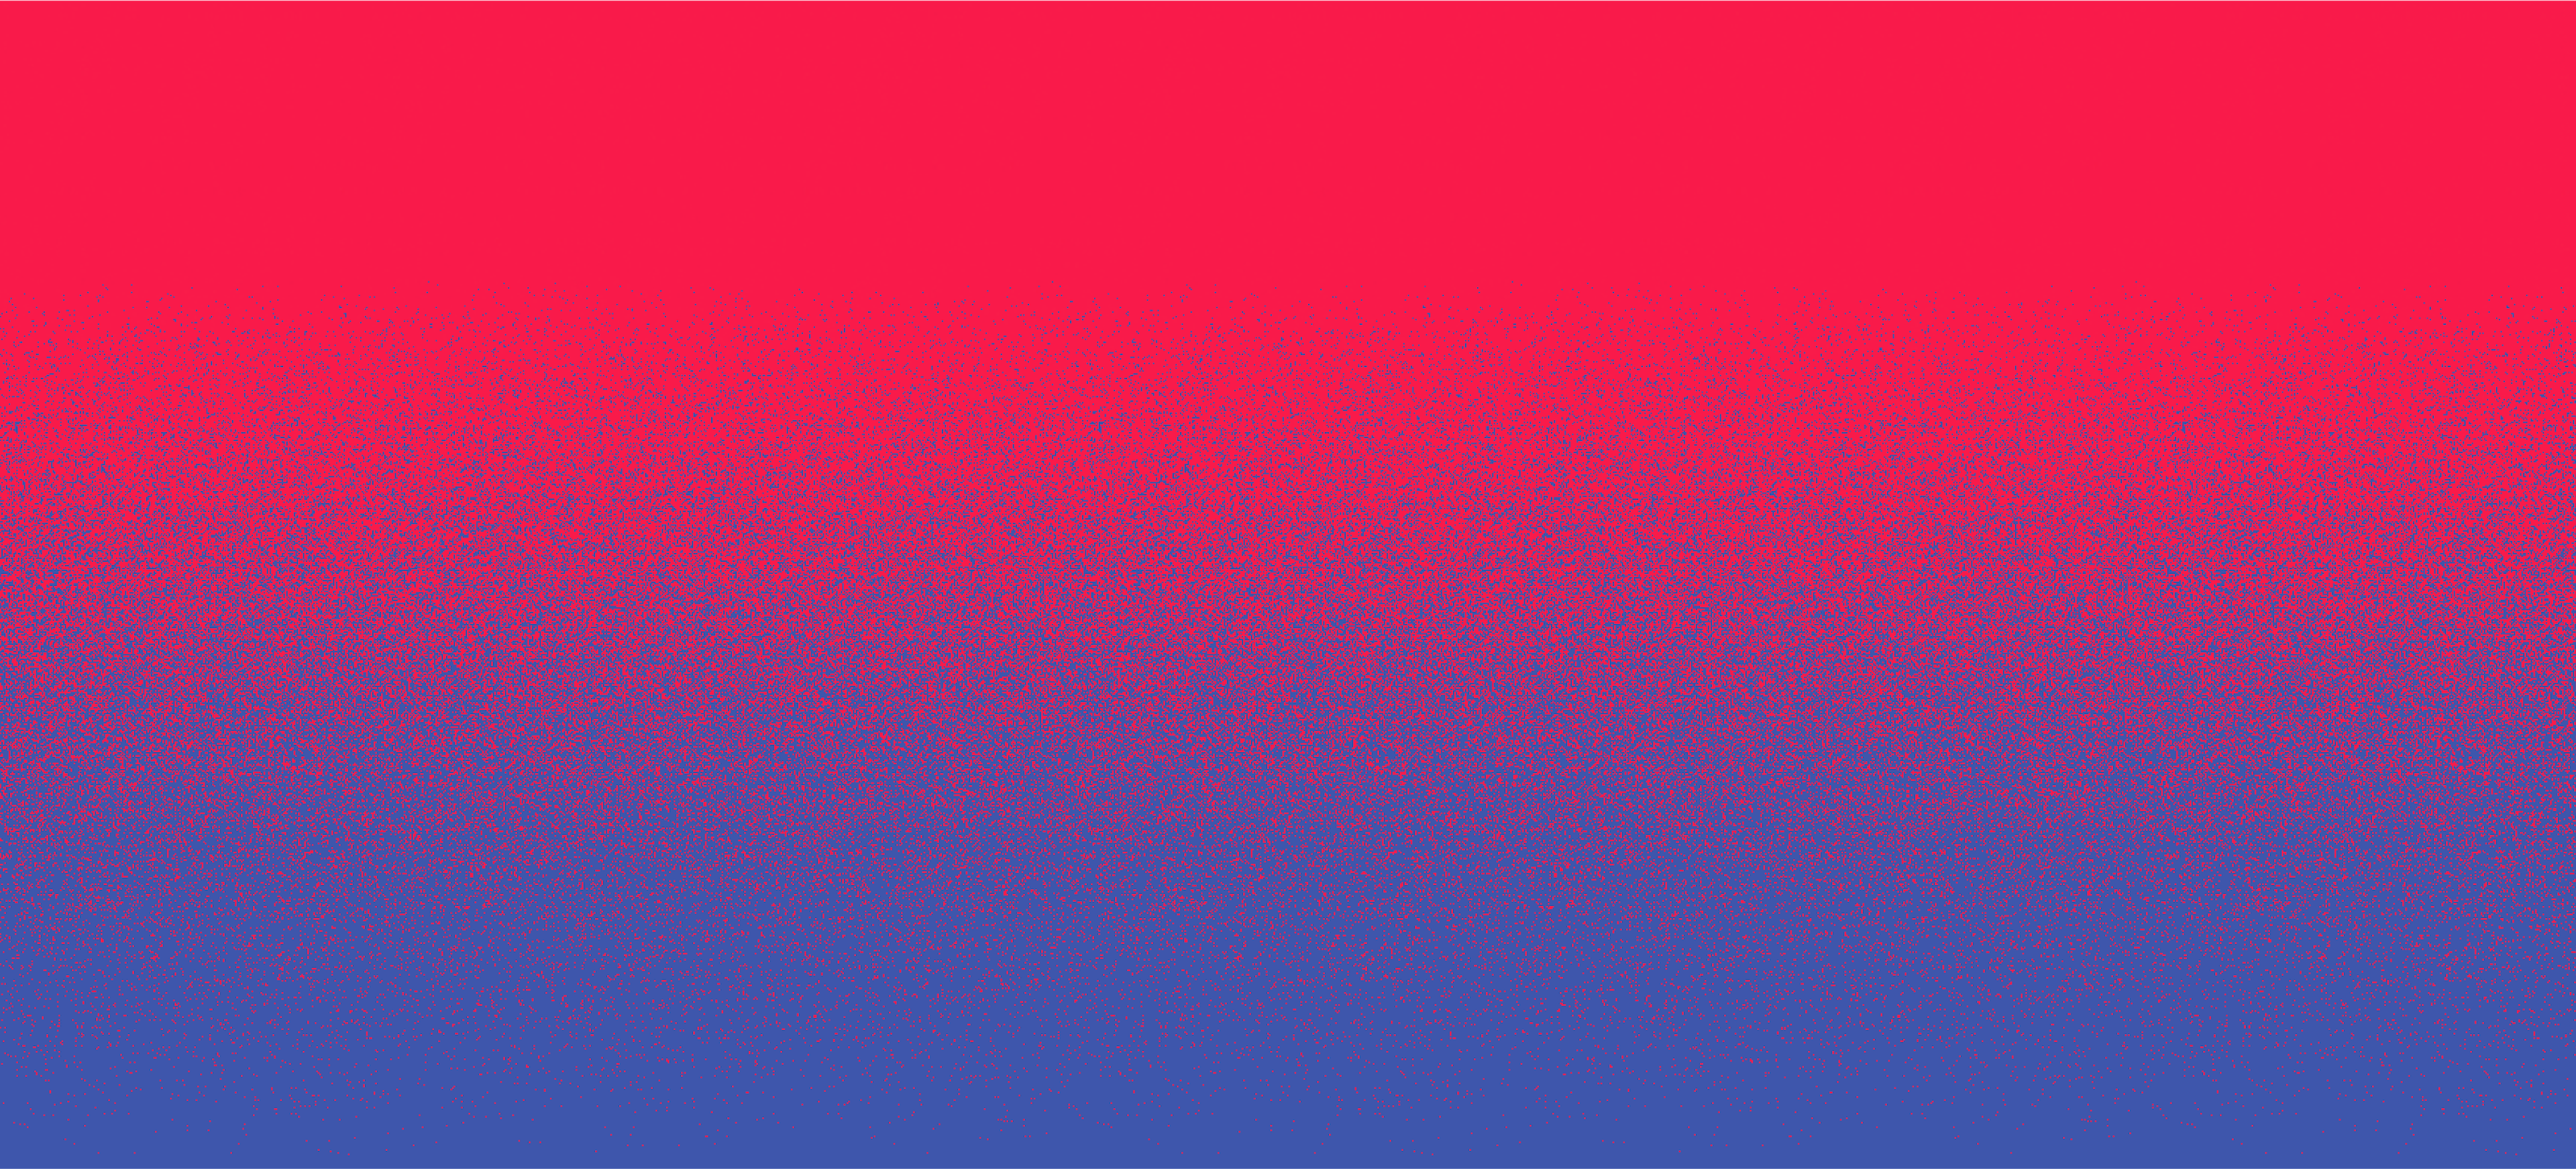 Red and blue textured gradient